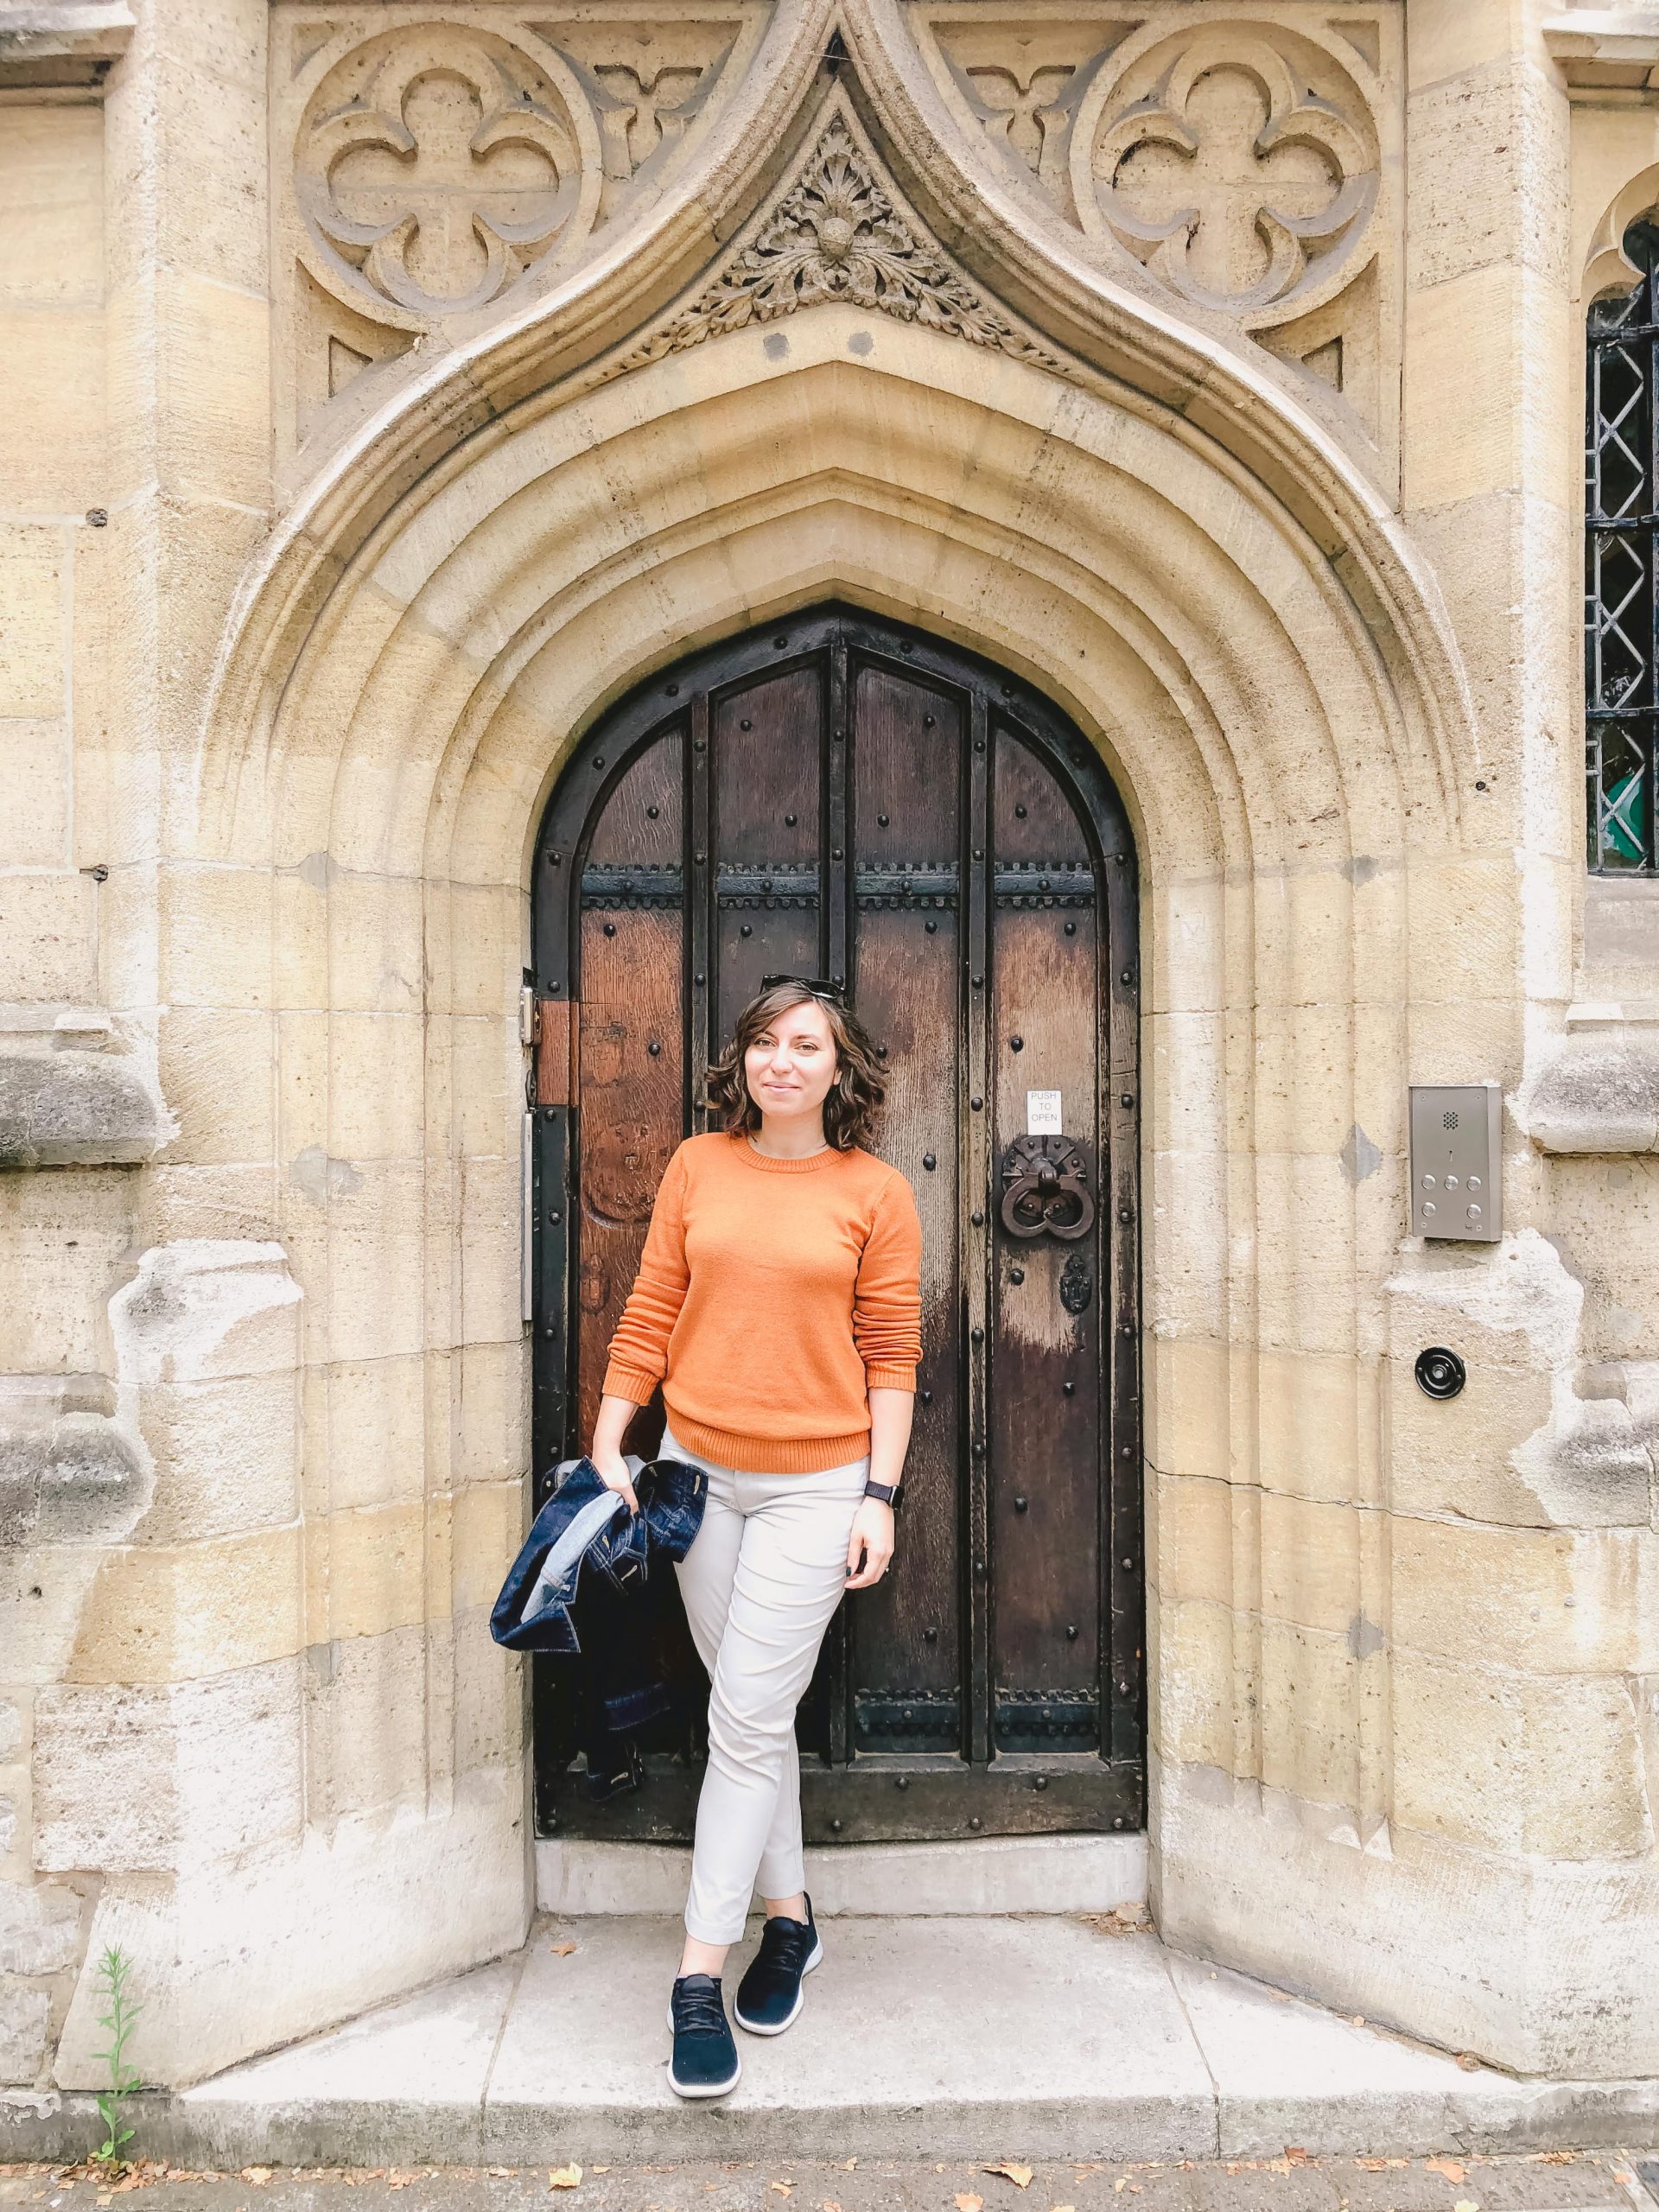 Cory wearing her Palma chinos from Bluffworks in Oxford with Allbirds tree runners